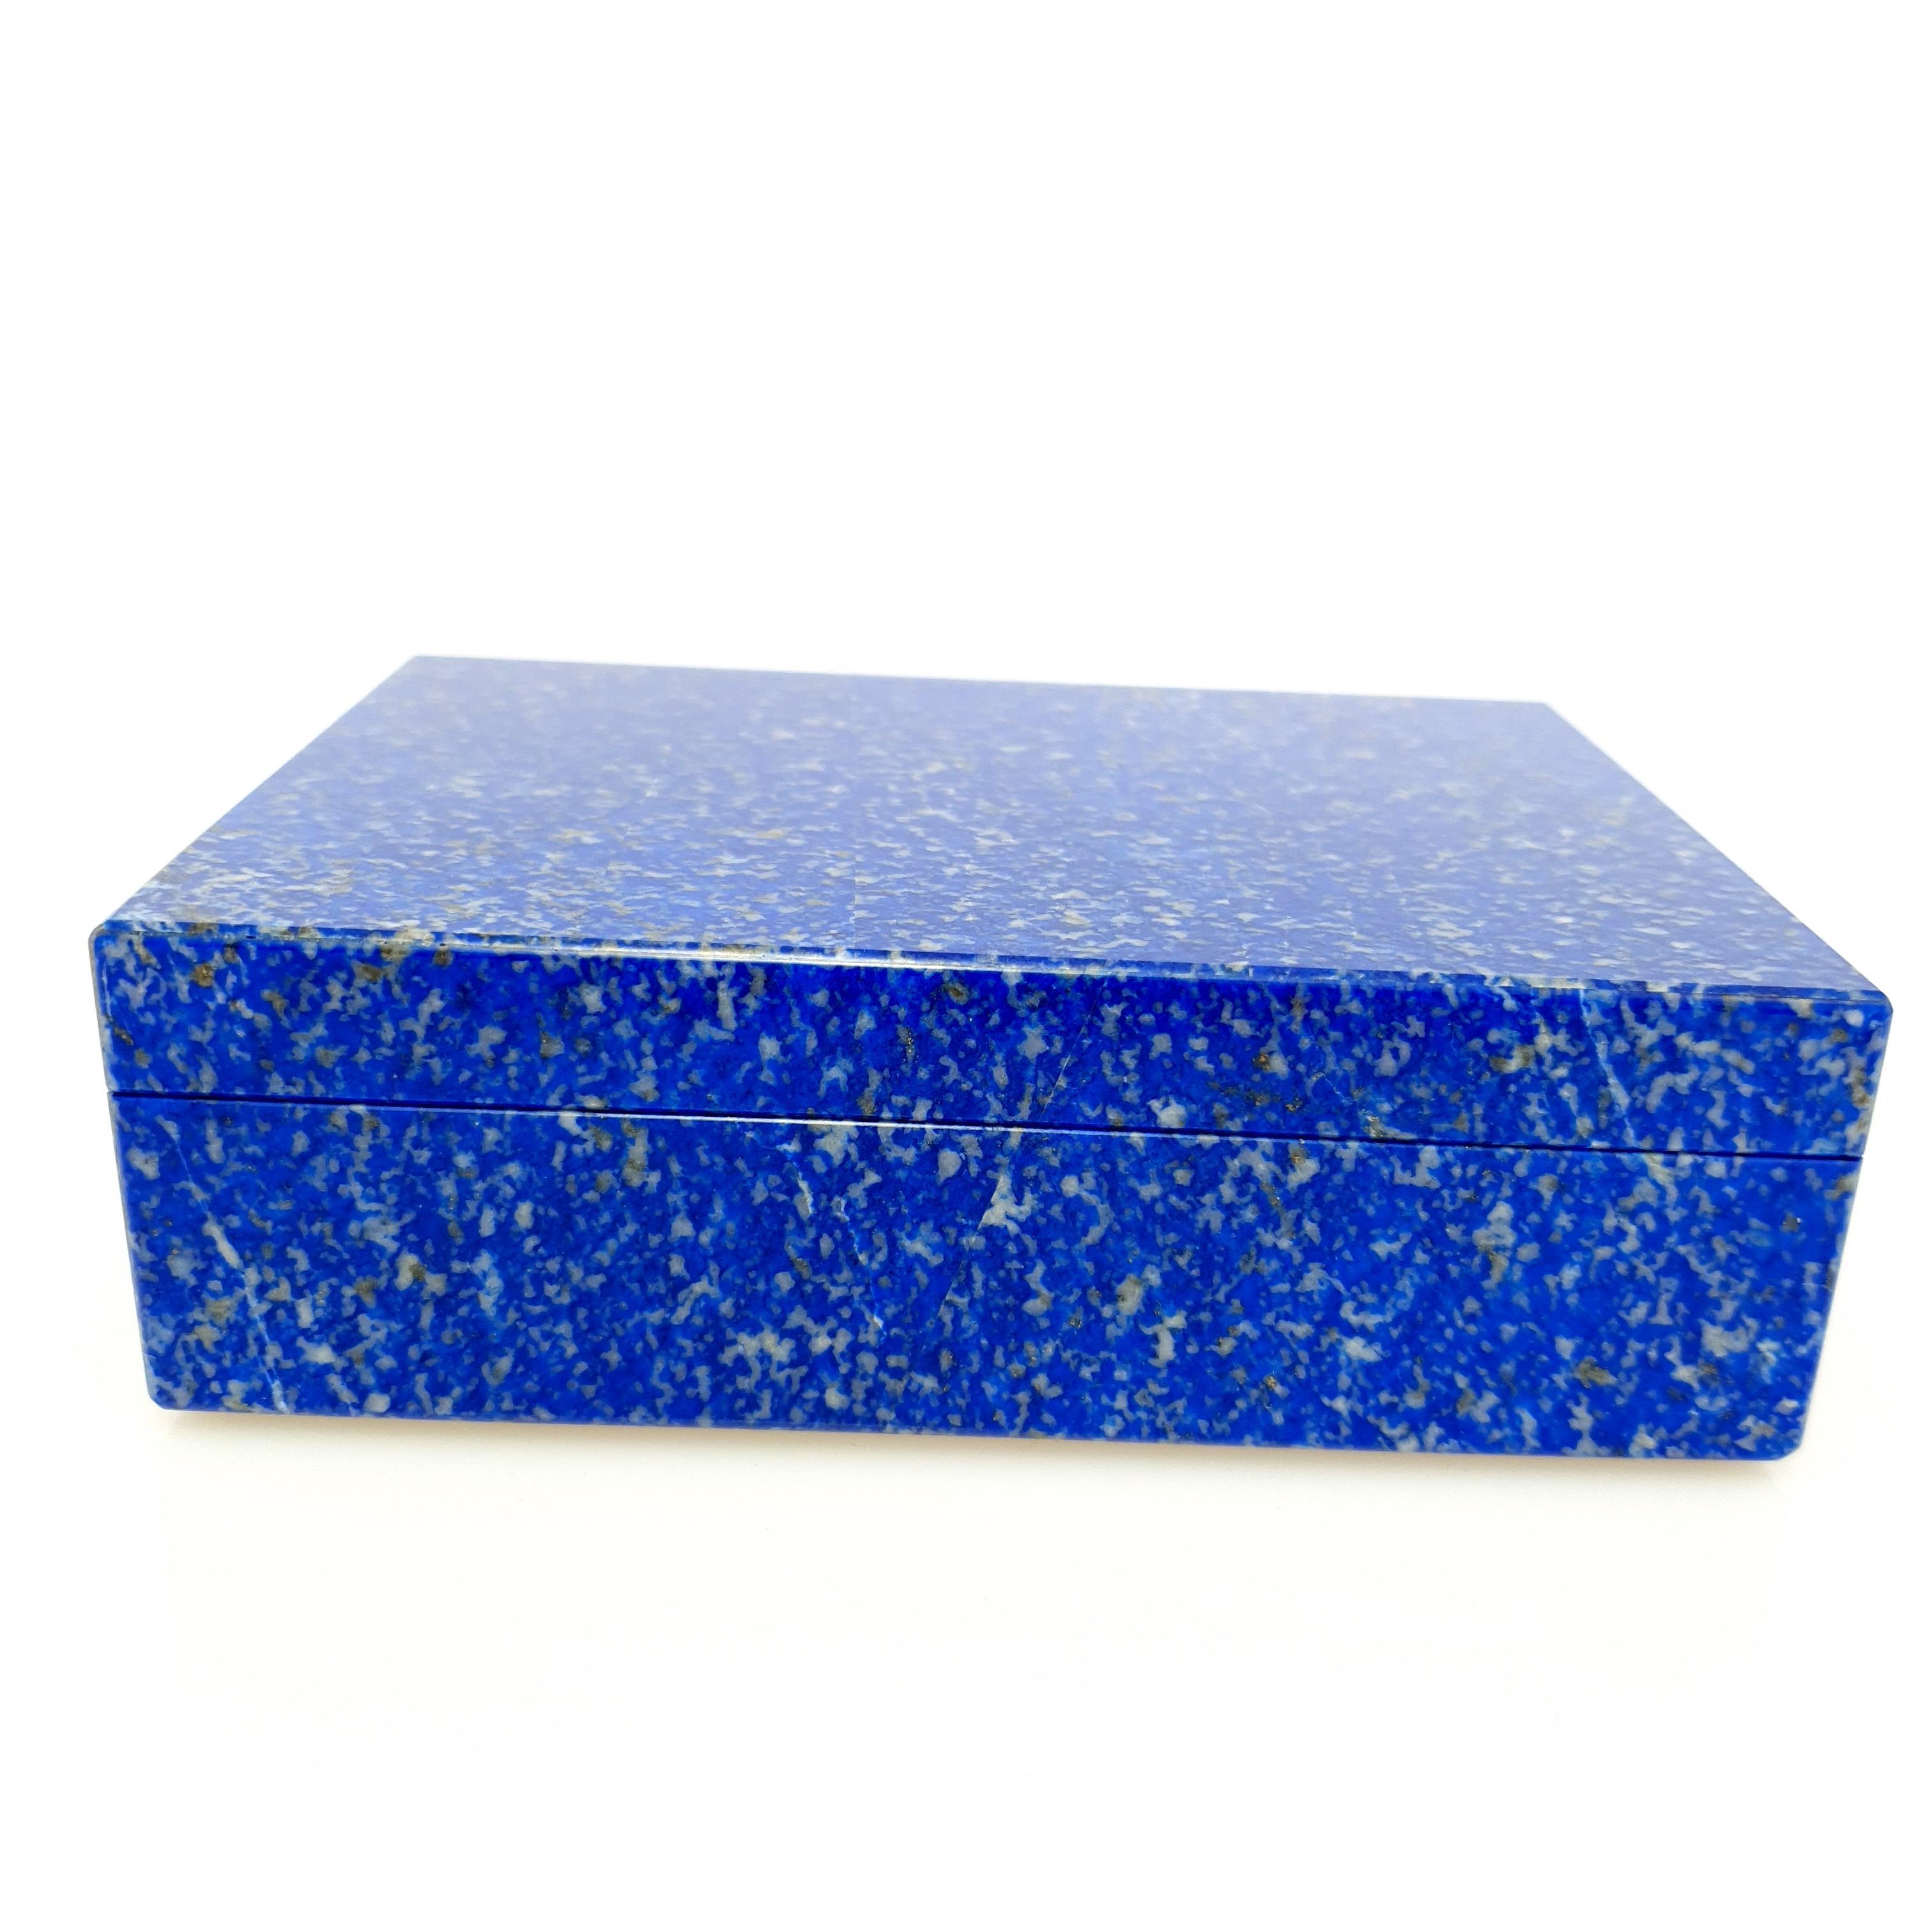 A handmade Natural White Blue Lapis Decorative Jewelry Box.
The pattern looks like an artful painting of nature.
The Inlay is made out of natural black Marble.
It's a great piece for decoration on a desk, vanity, or even as a special gift.